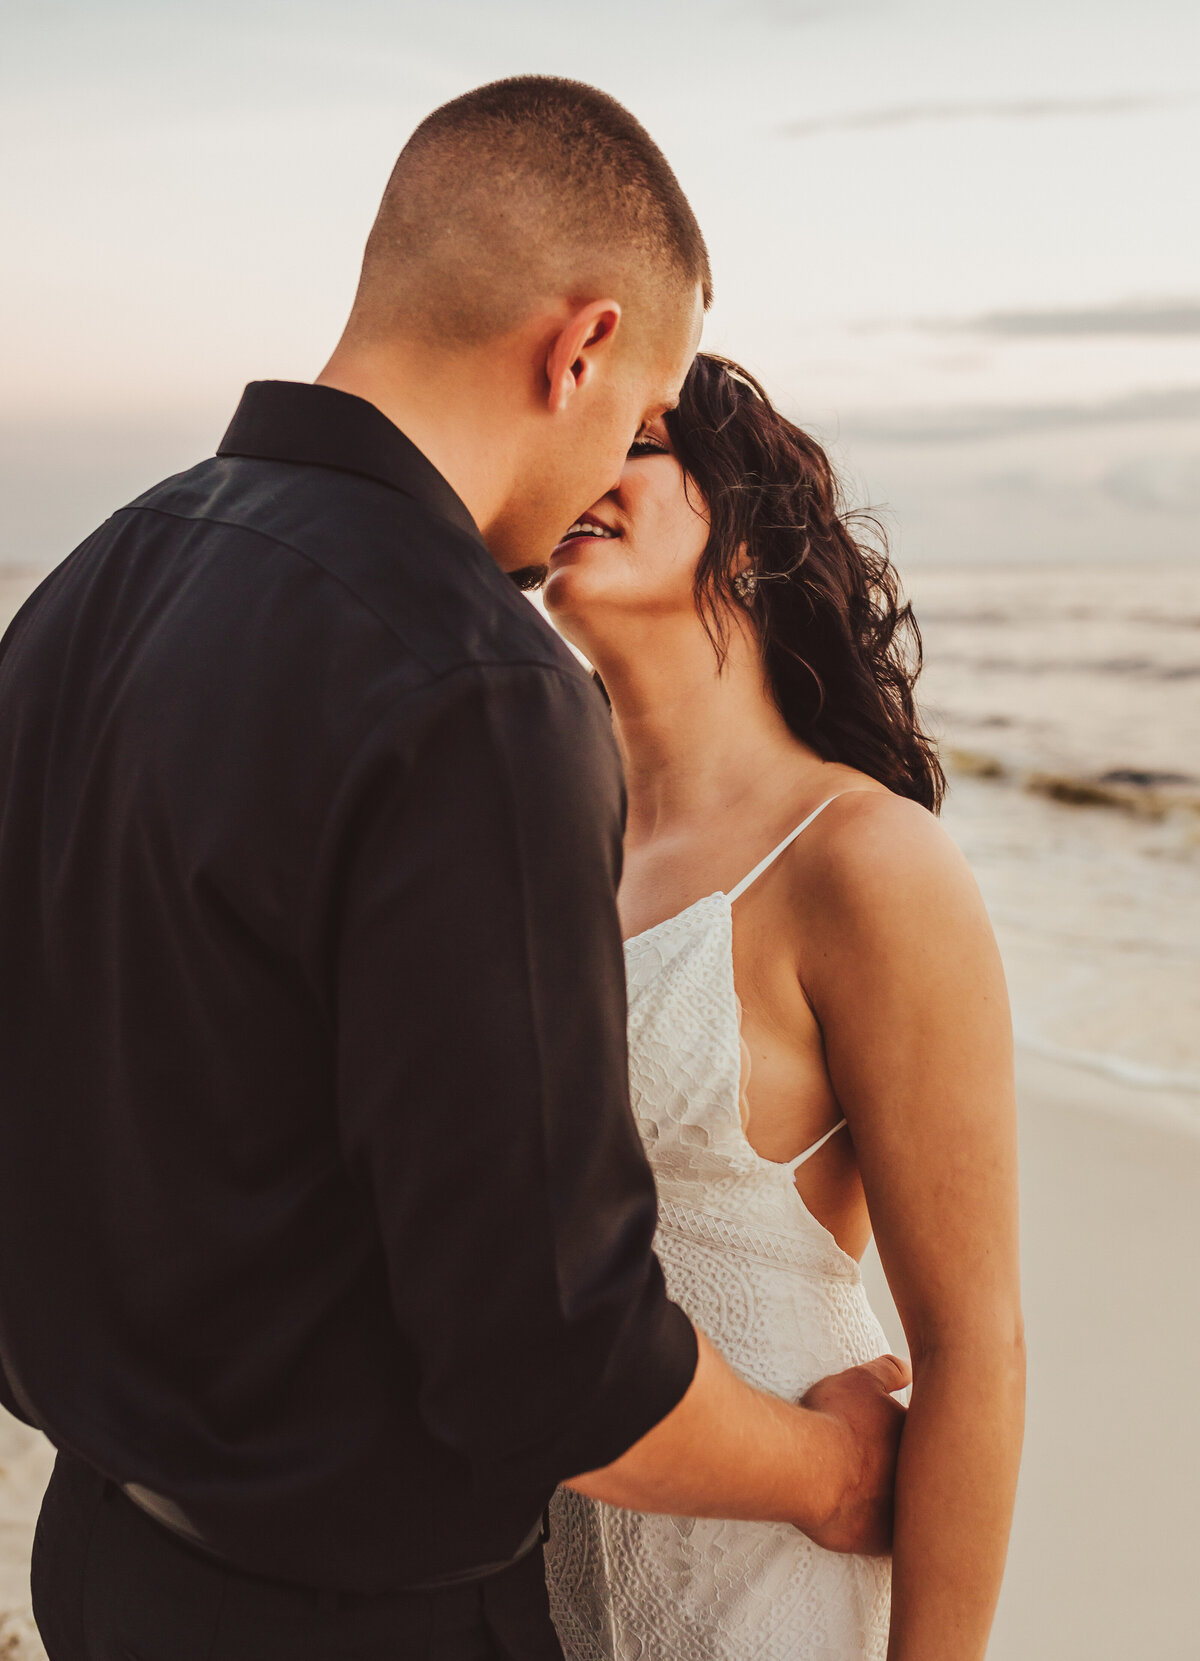 newlyweds kiss at sunset, he's wearing all black, she's wearing white wedding dress.  Taken by panama city wedding photographer Brittney Stanley